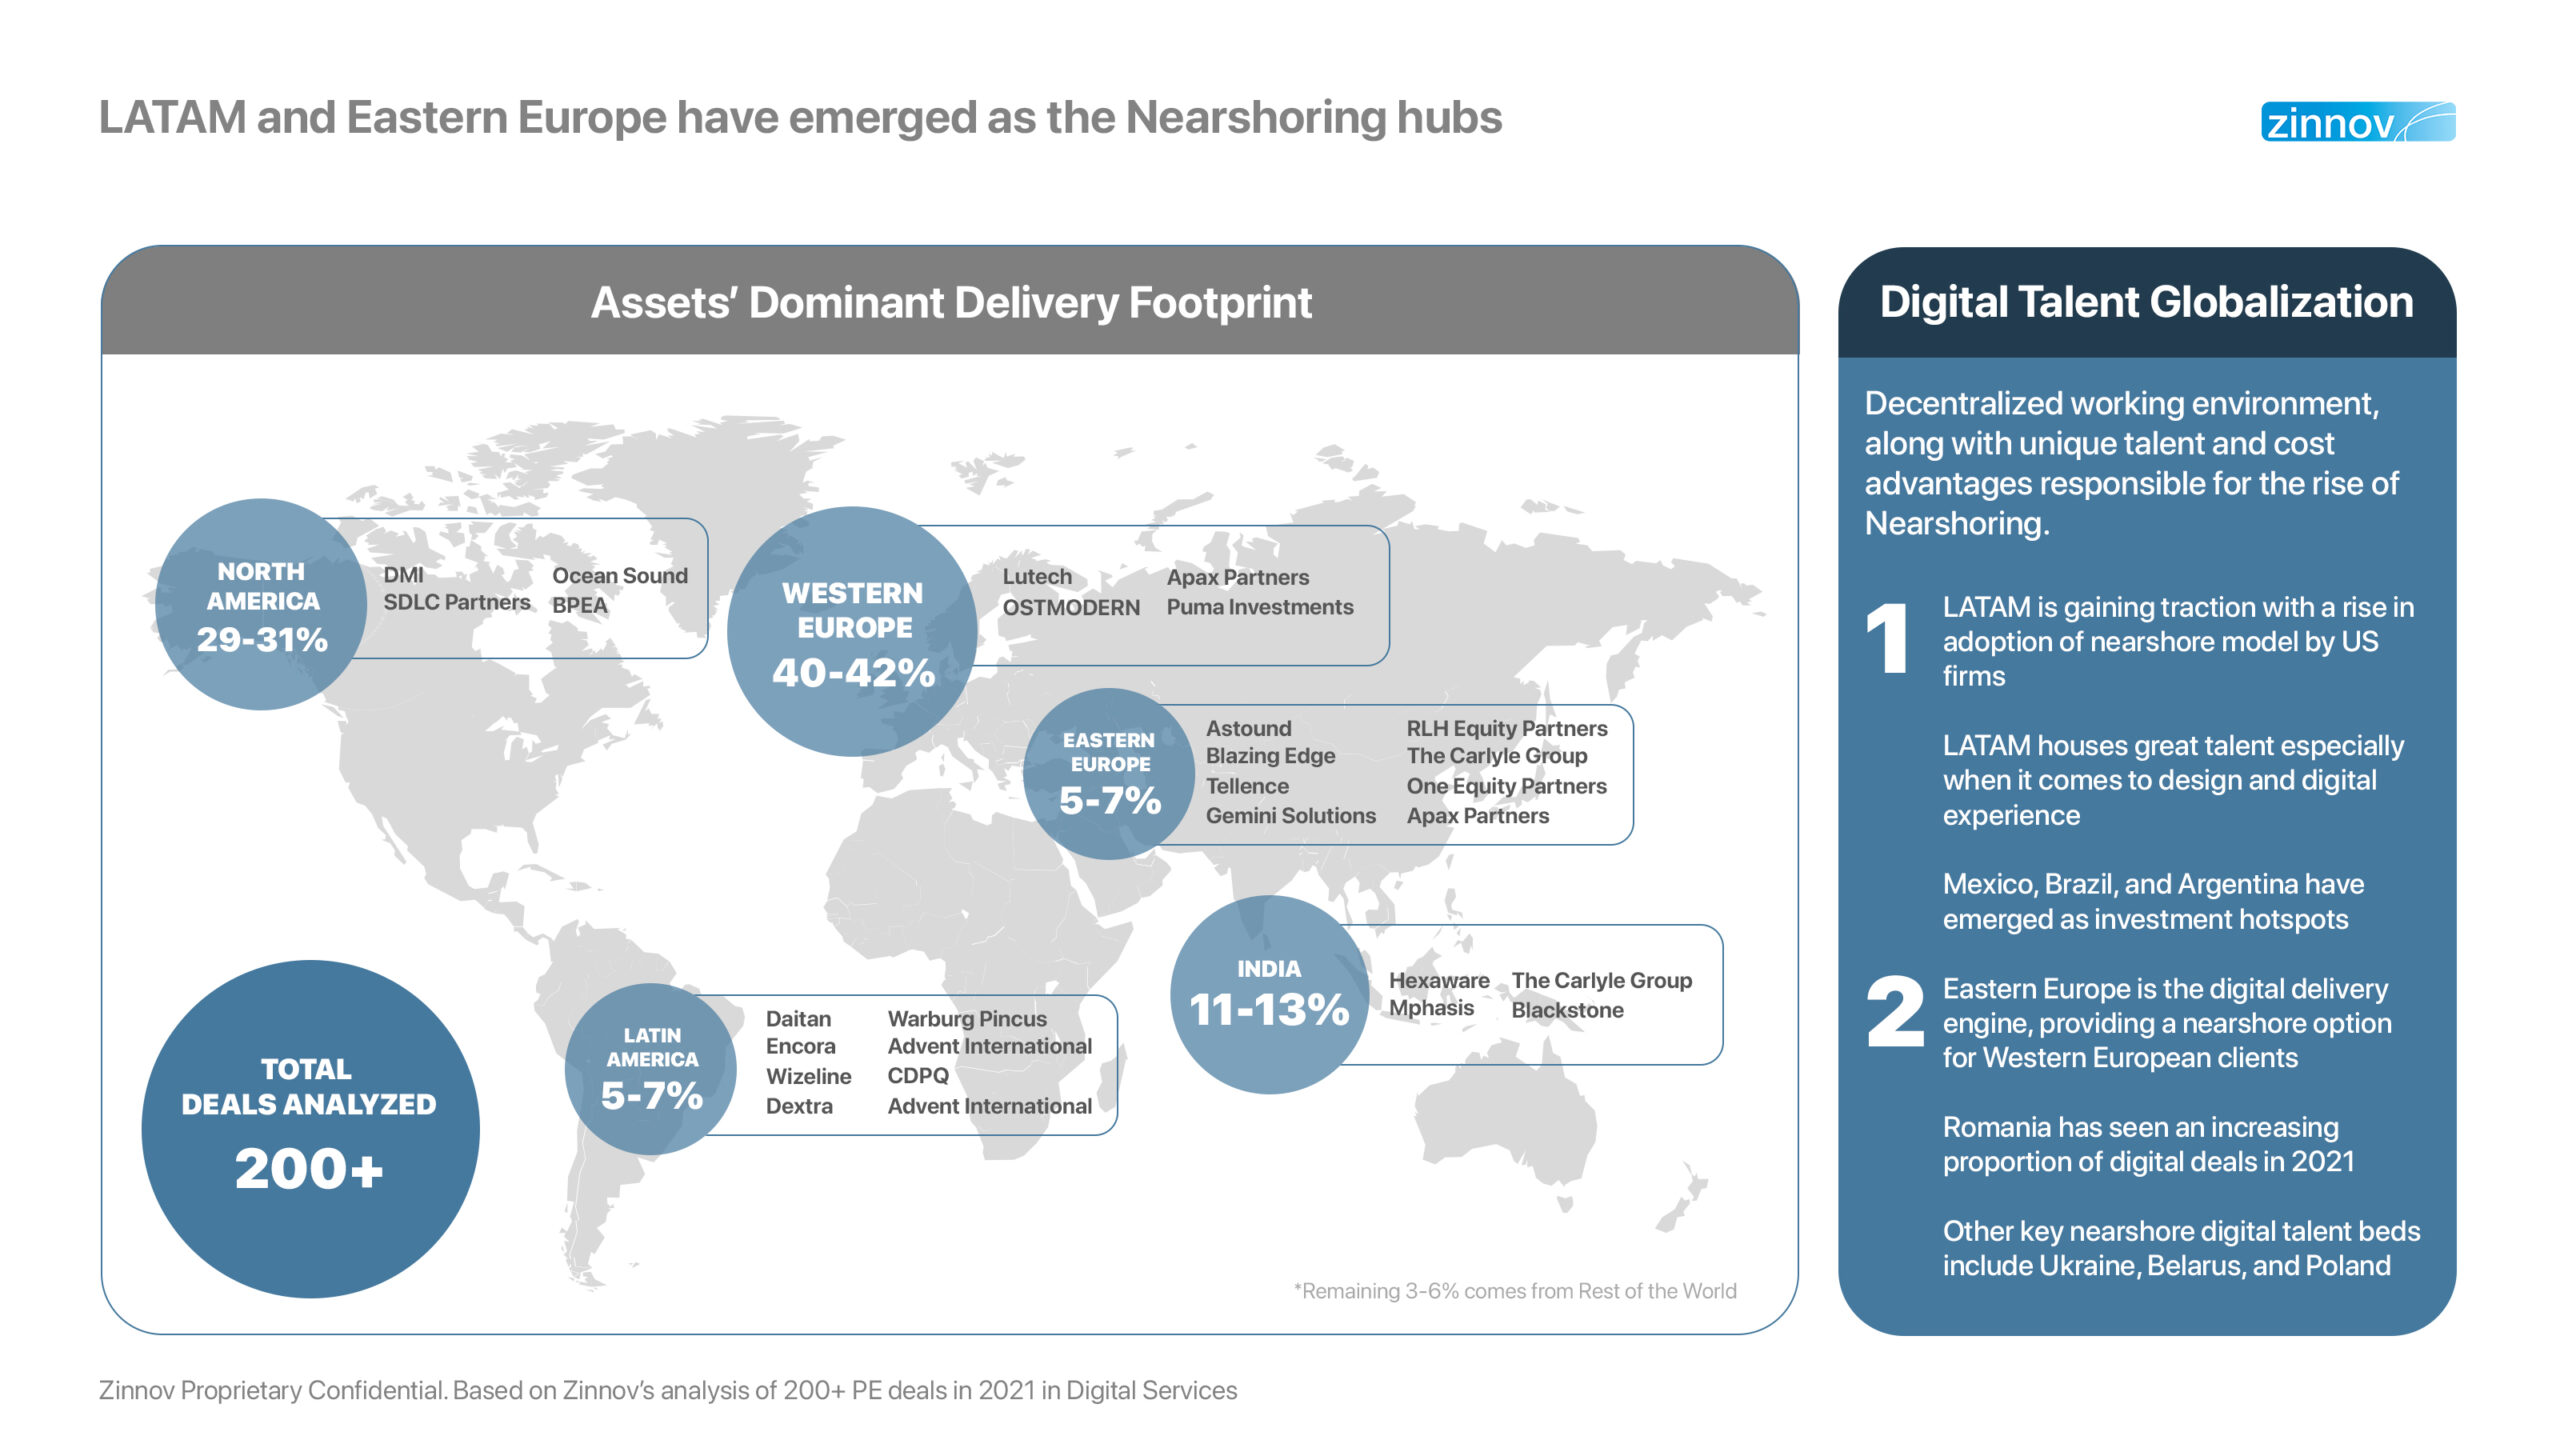 LATAM and EE have emerged as the Nearshore hubs